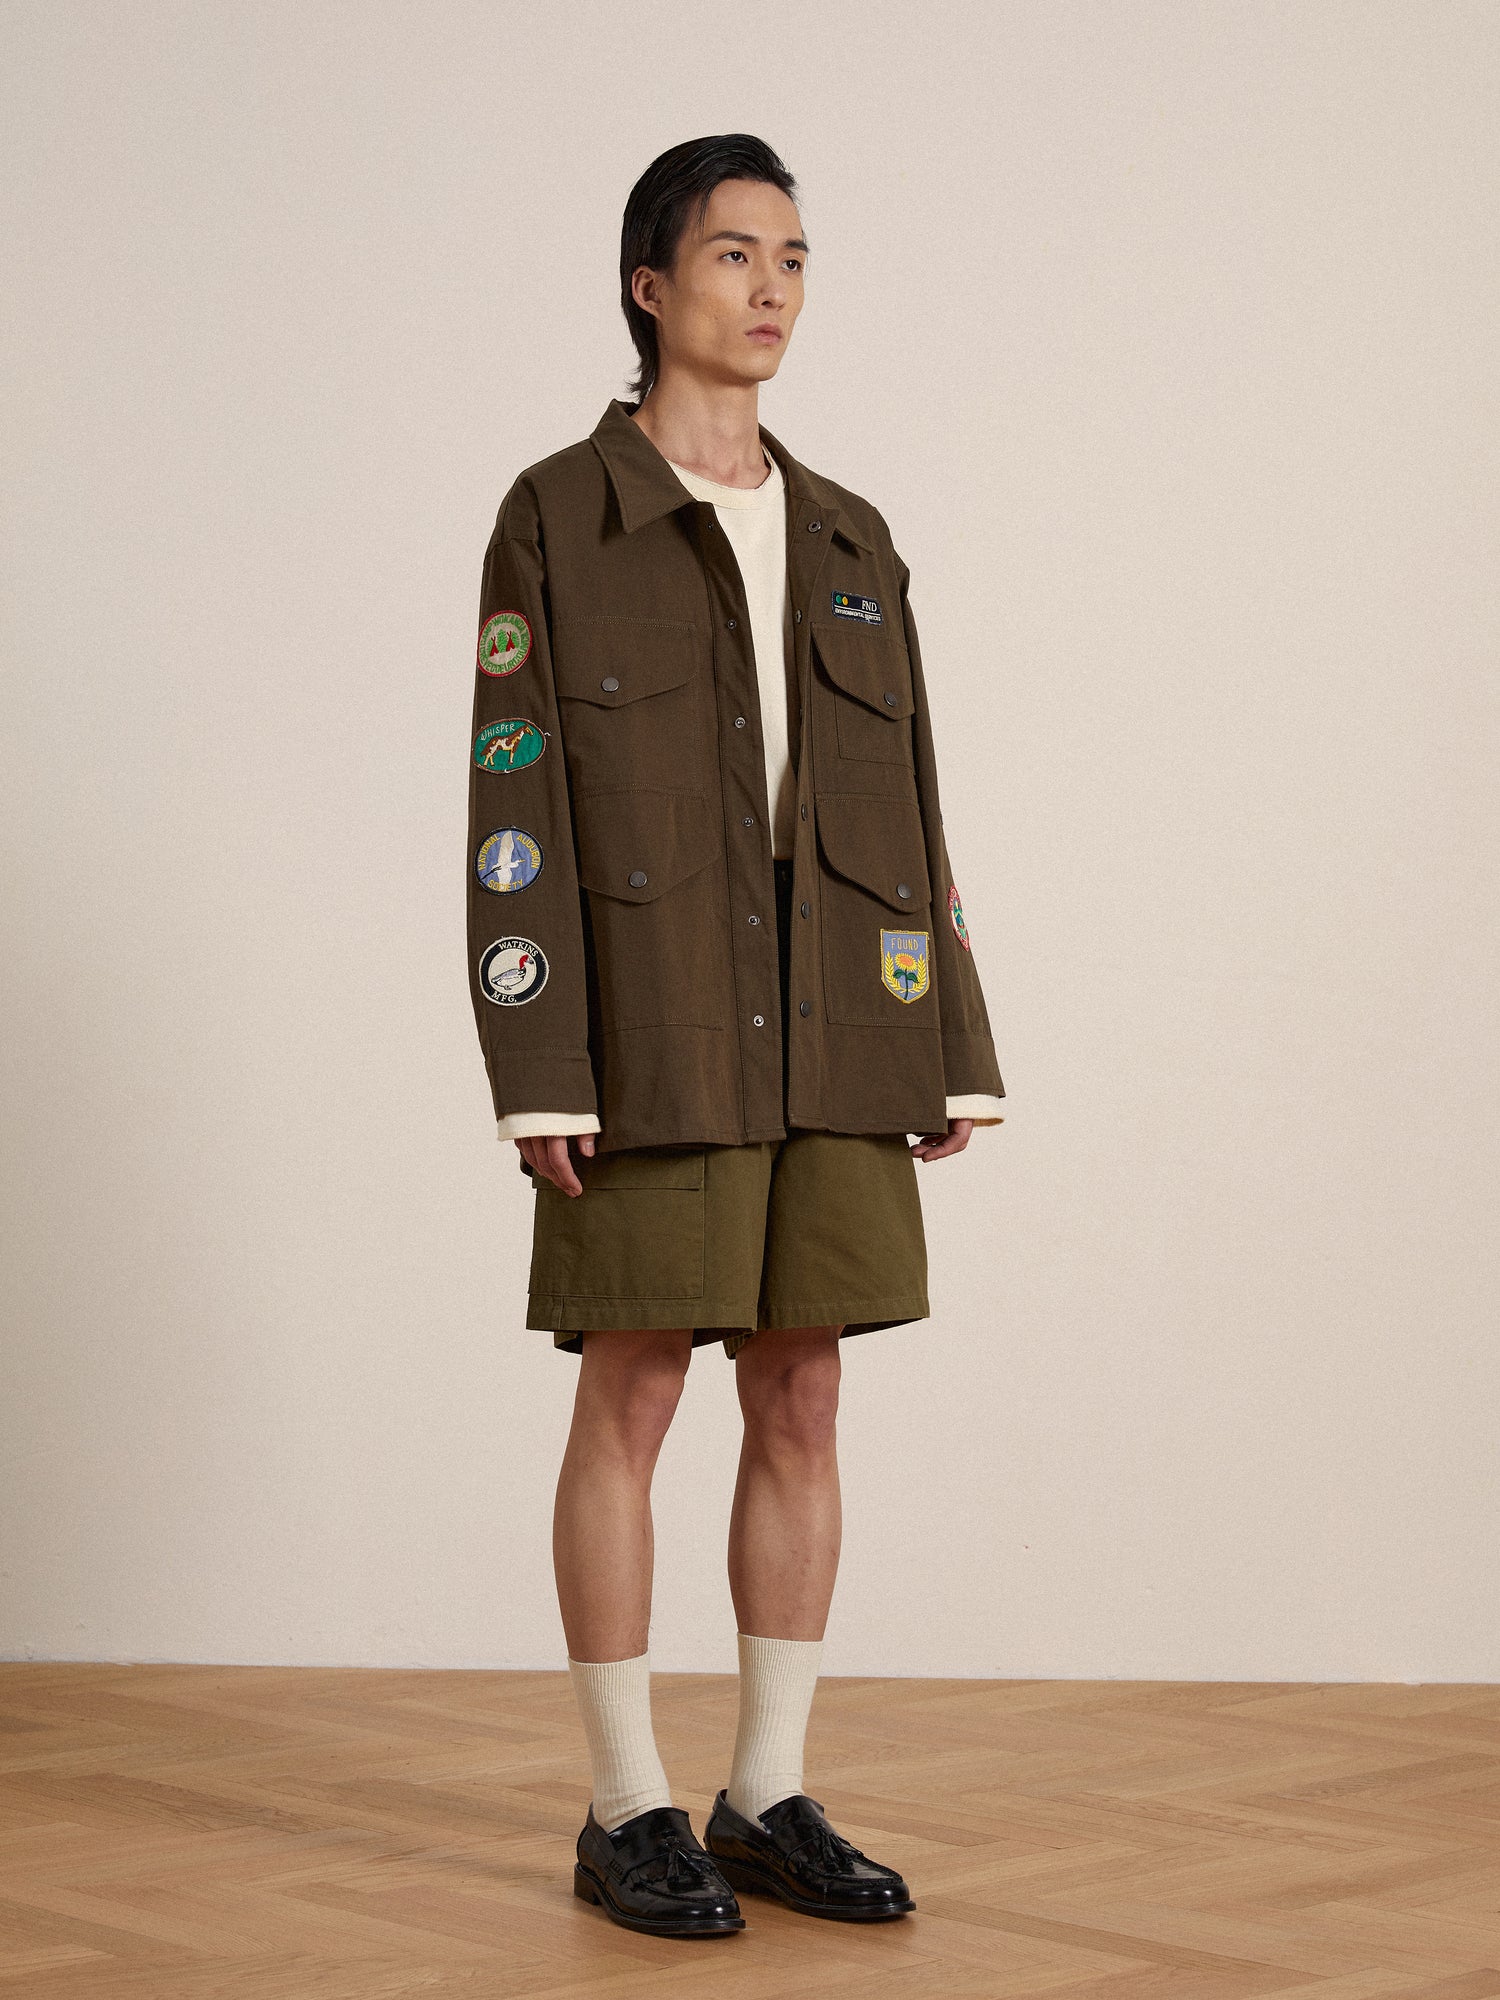 A man wearing a vintage-inspired Found Ports Park Multi Patch Work Jacket with embroidered patches and shorts.